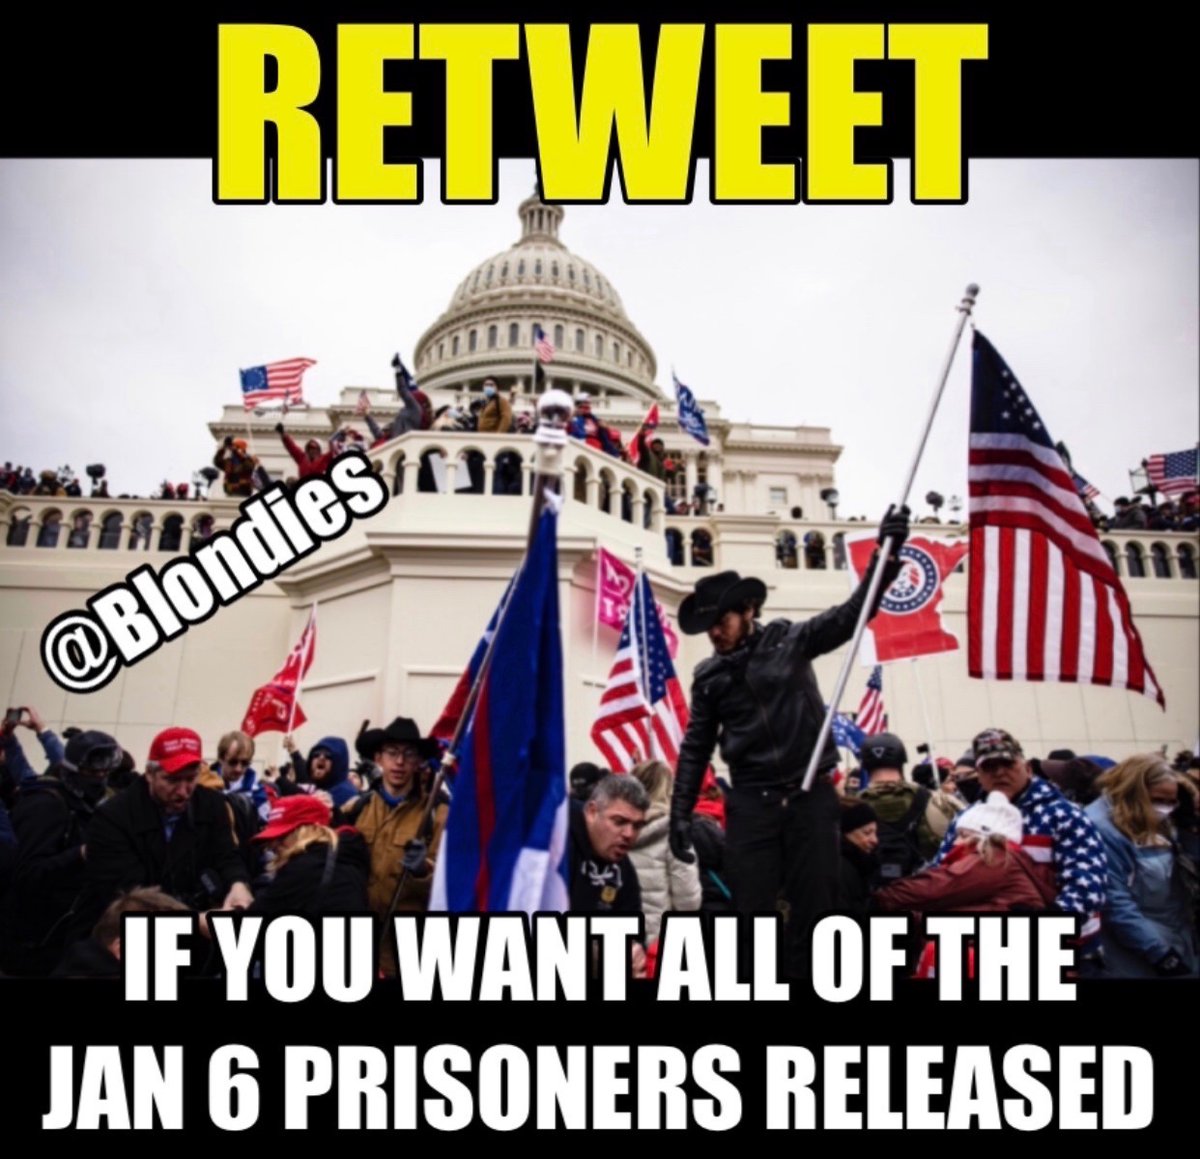 Release the JAN 6 PRlS0NERS🇺🇸